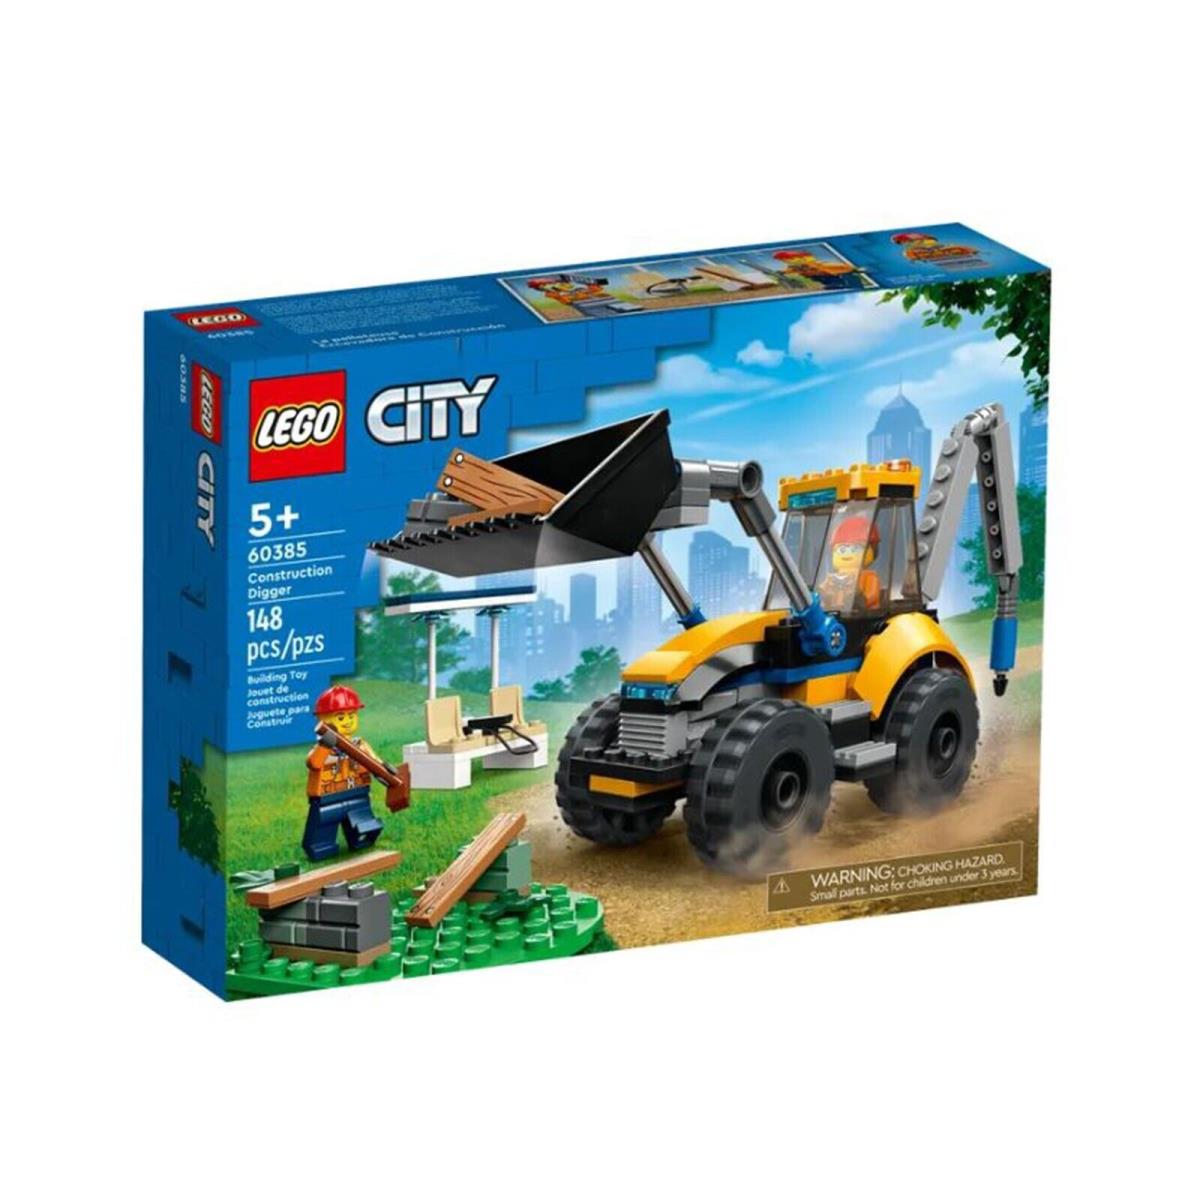 Lego City Construction Digger Building Set 60385 IN Stock